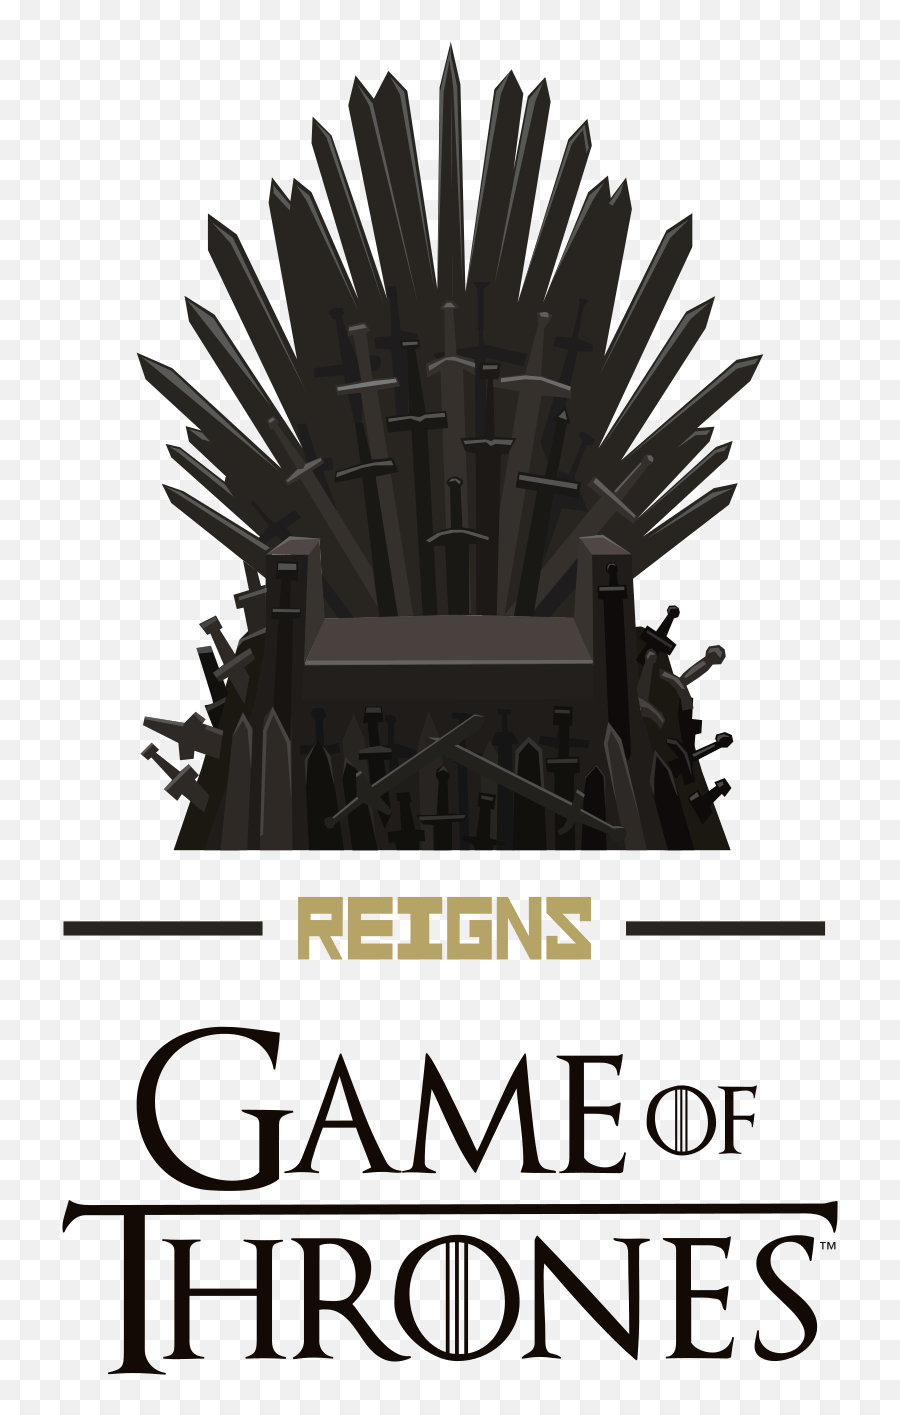 Logo In Svg Vector Or Png File Format - Game Of Thrones Logo Png,Game Of Thrones Logo Png